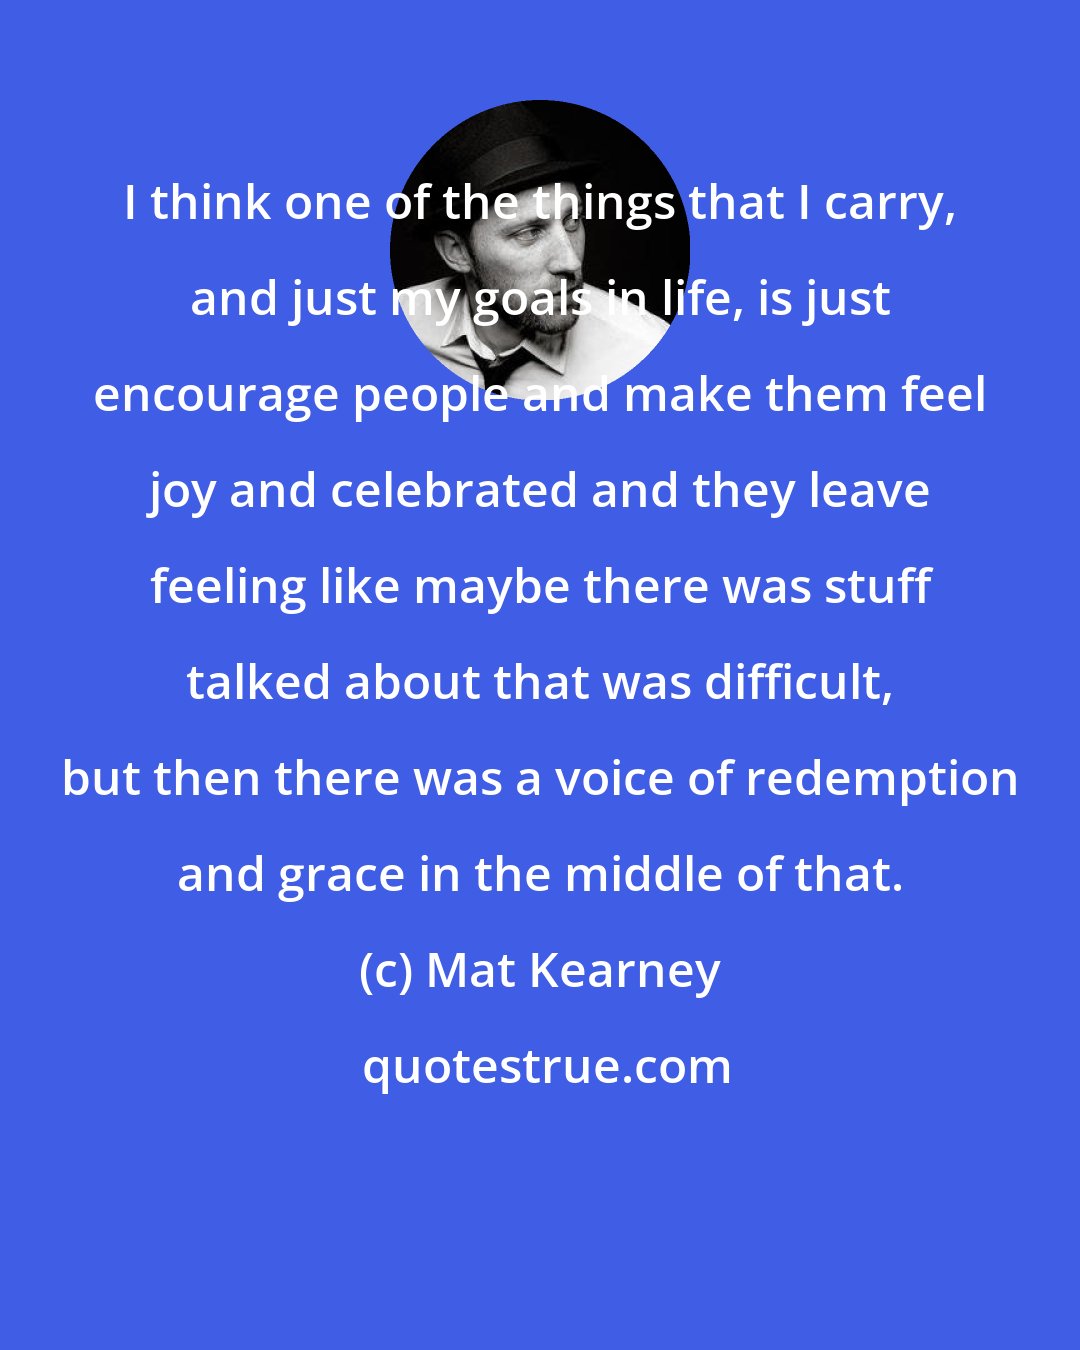 Mat Kearney: I think one of the things that I carry, and just my goals in life, is just encourage people and make them feel joy and celebrated and they leave feeling like maybe there was stuff talked about that was difficult, but then there was a voice of redemption and grace in the middle of that.